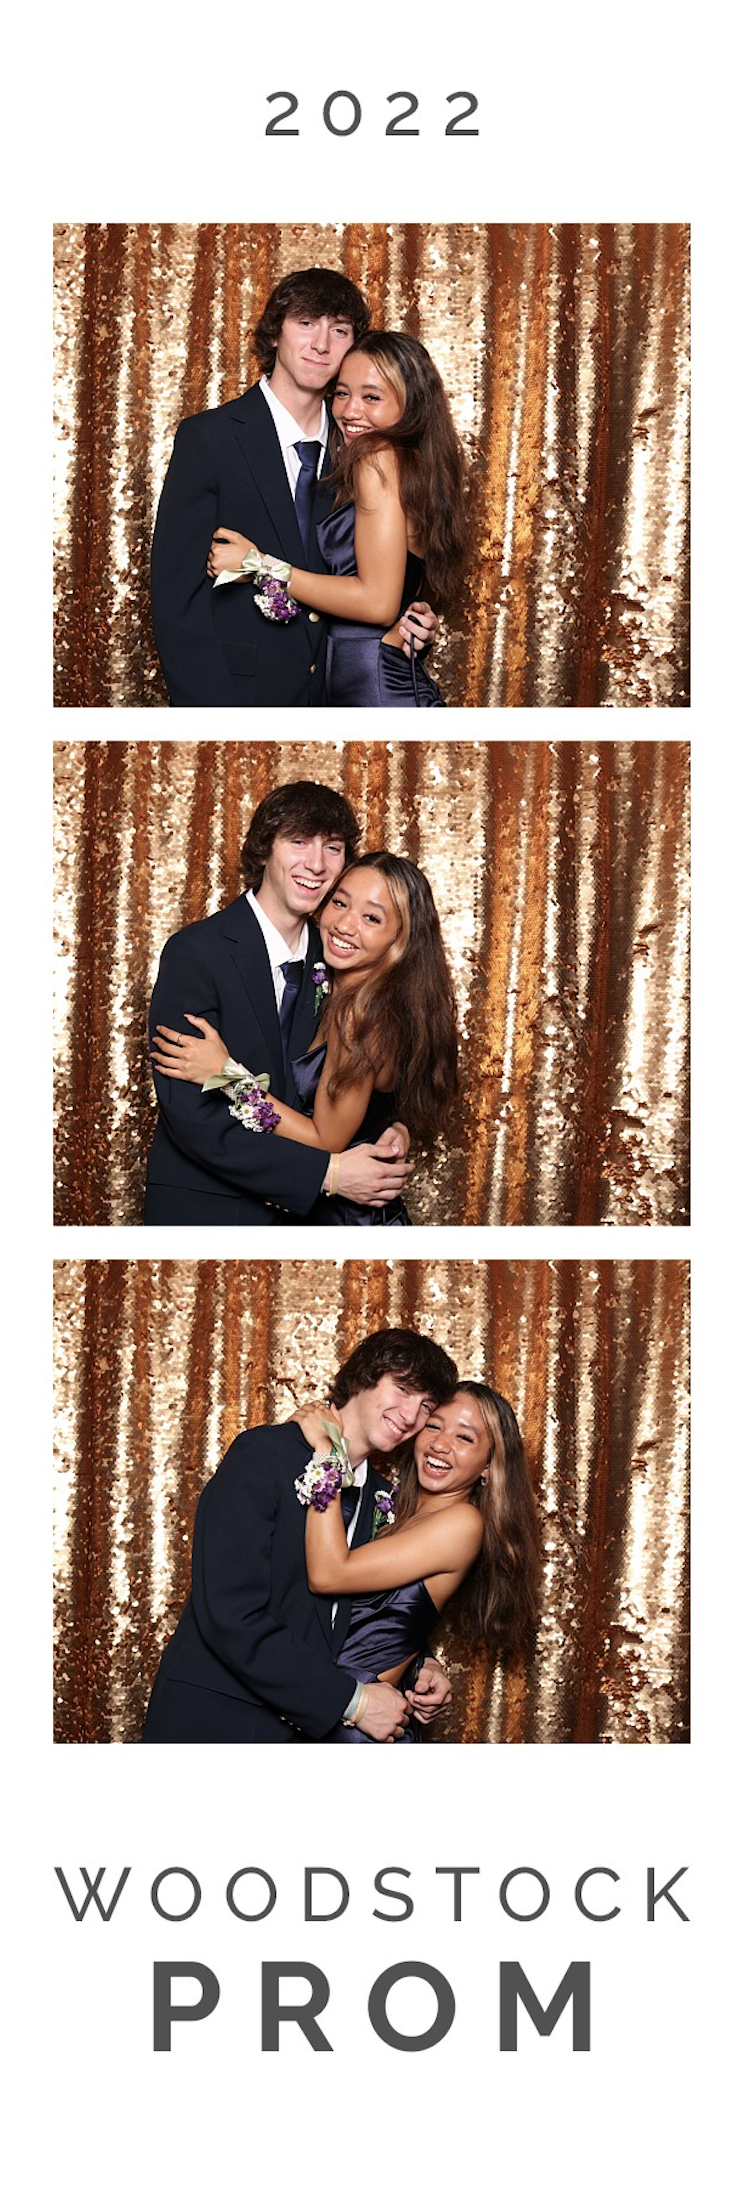 customized prom photo booth photo strip with 3 different images featuring 2 high schoolers at the Woodstock, Vermont prom